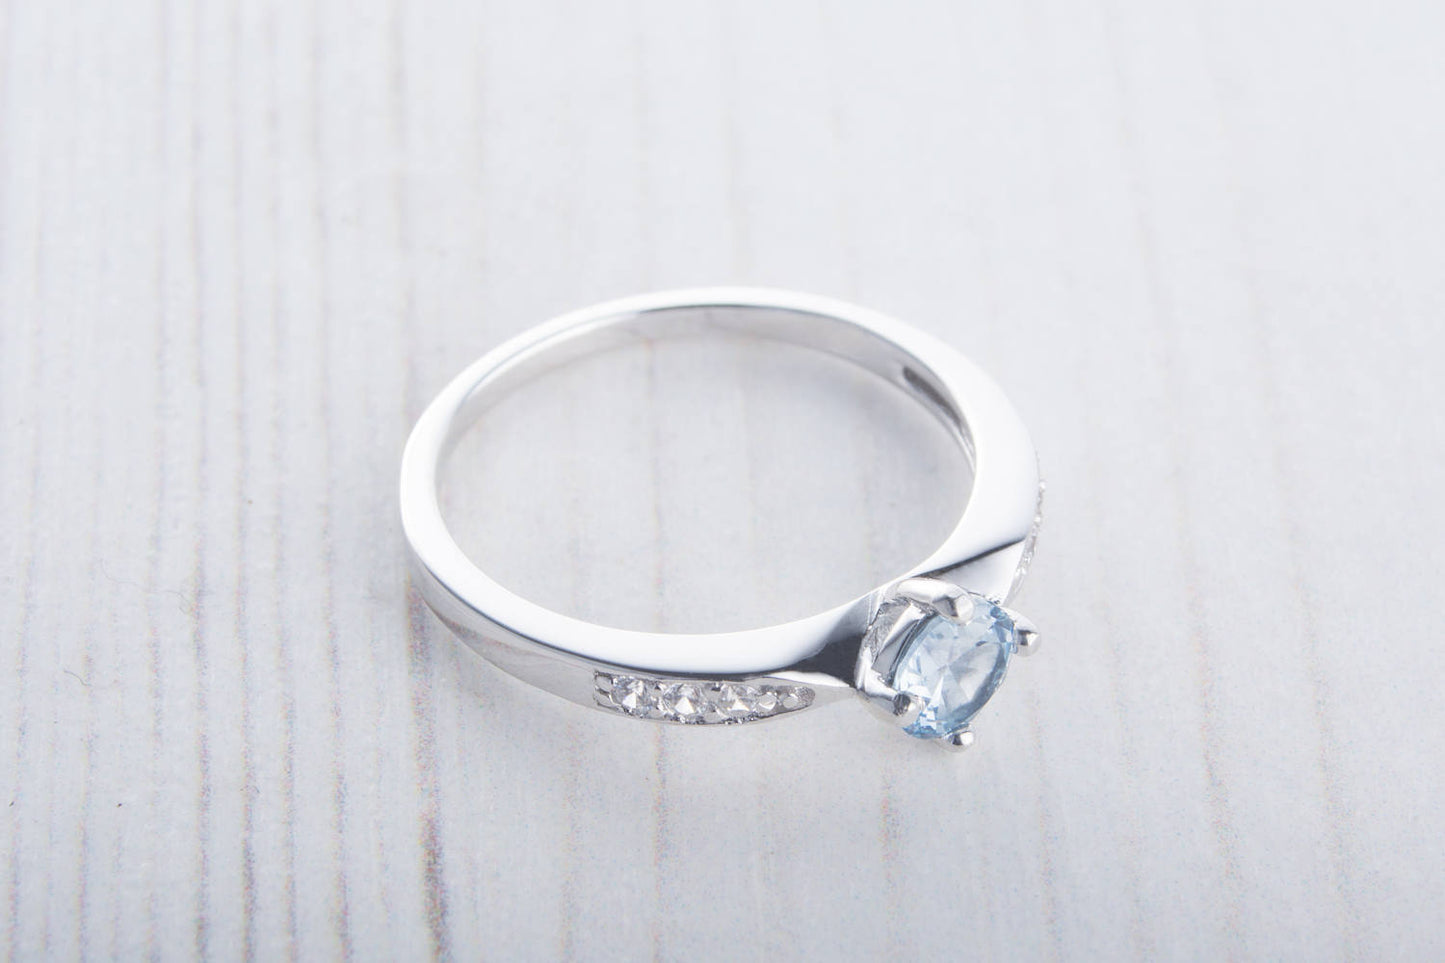 Genuine aquamarine Solitaire engagement ring - Available in white gold and sterling silver - handmade engagement ring - wedding ring